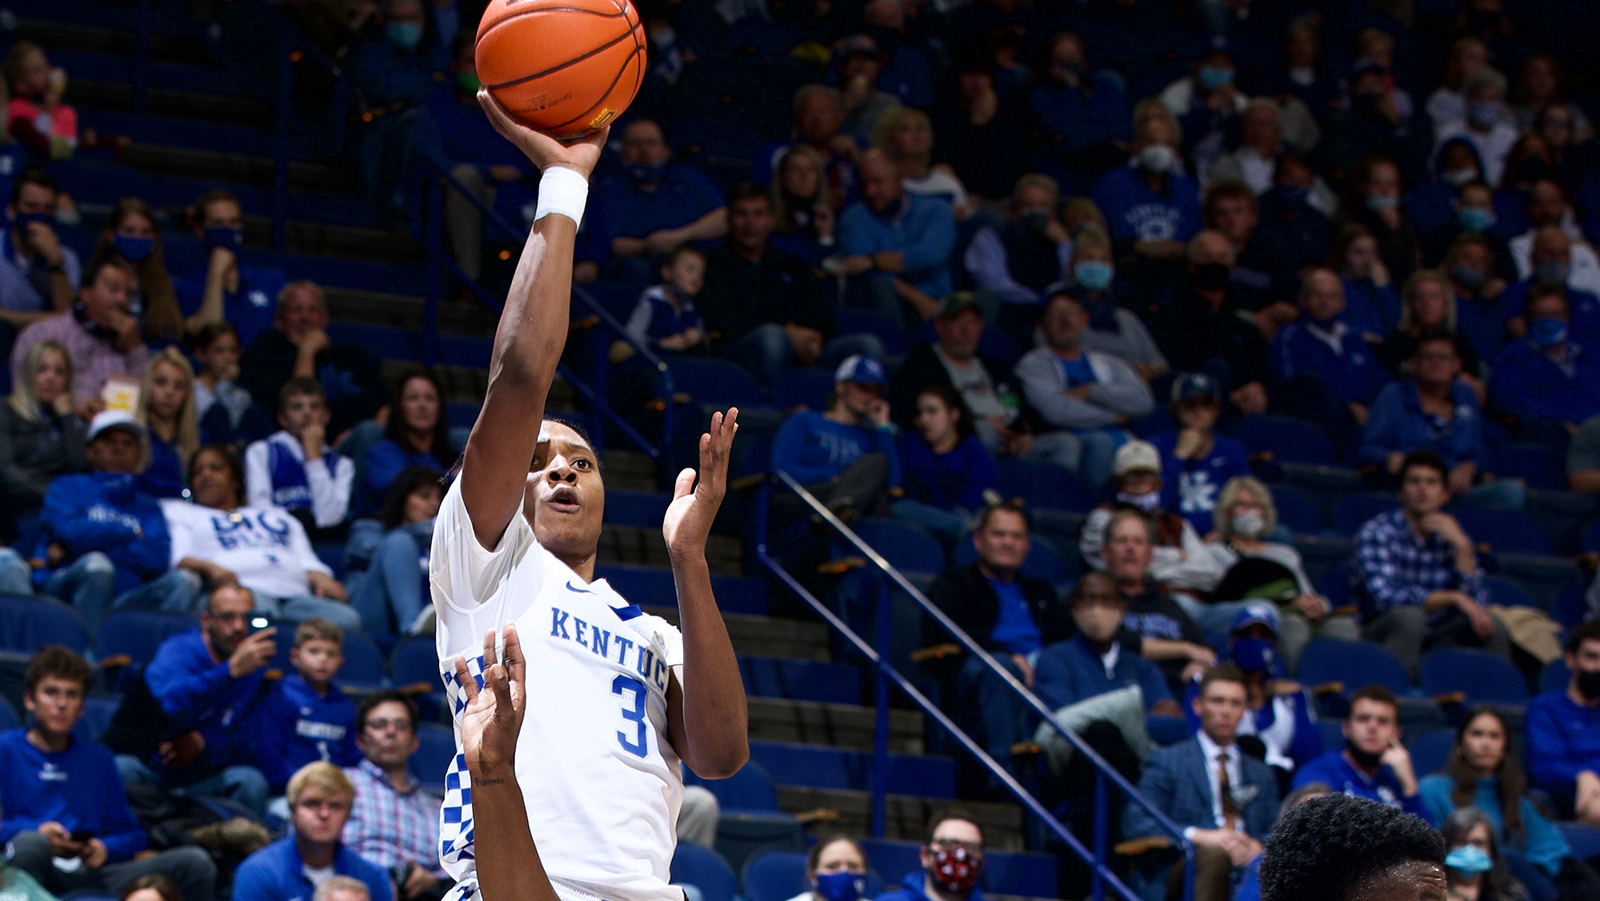 Backcourt Leads Cats in Tuesday Victory